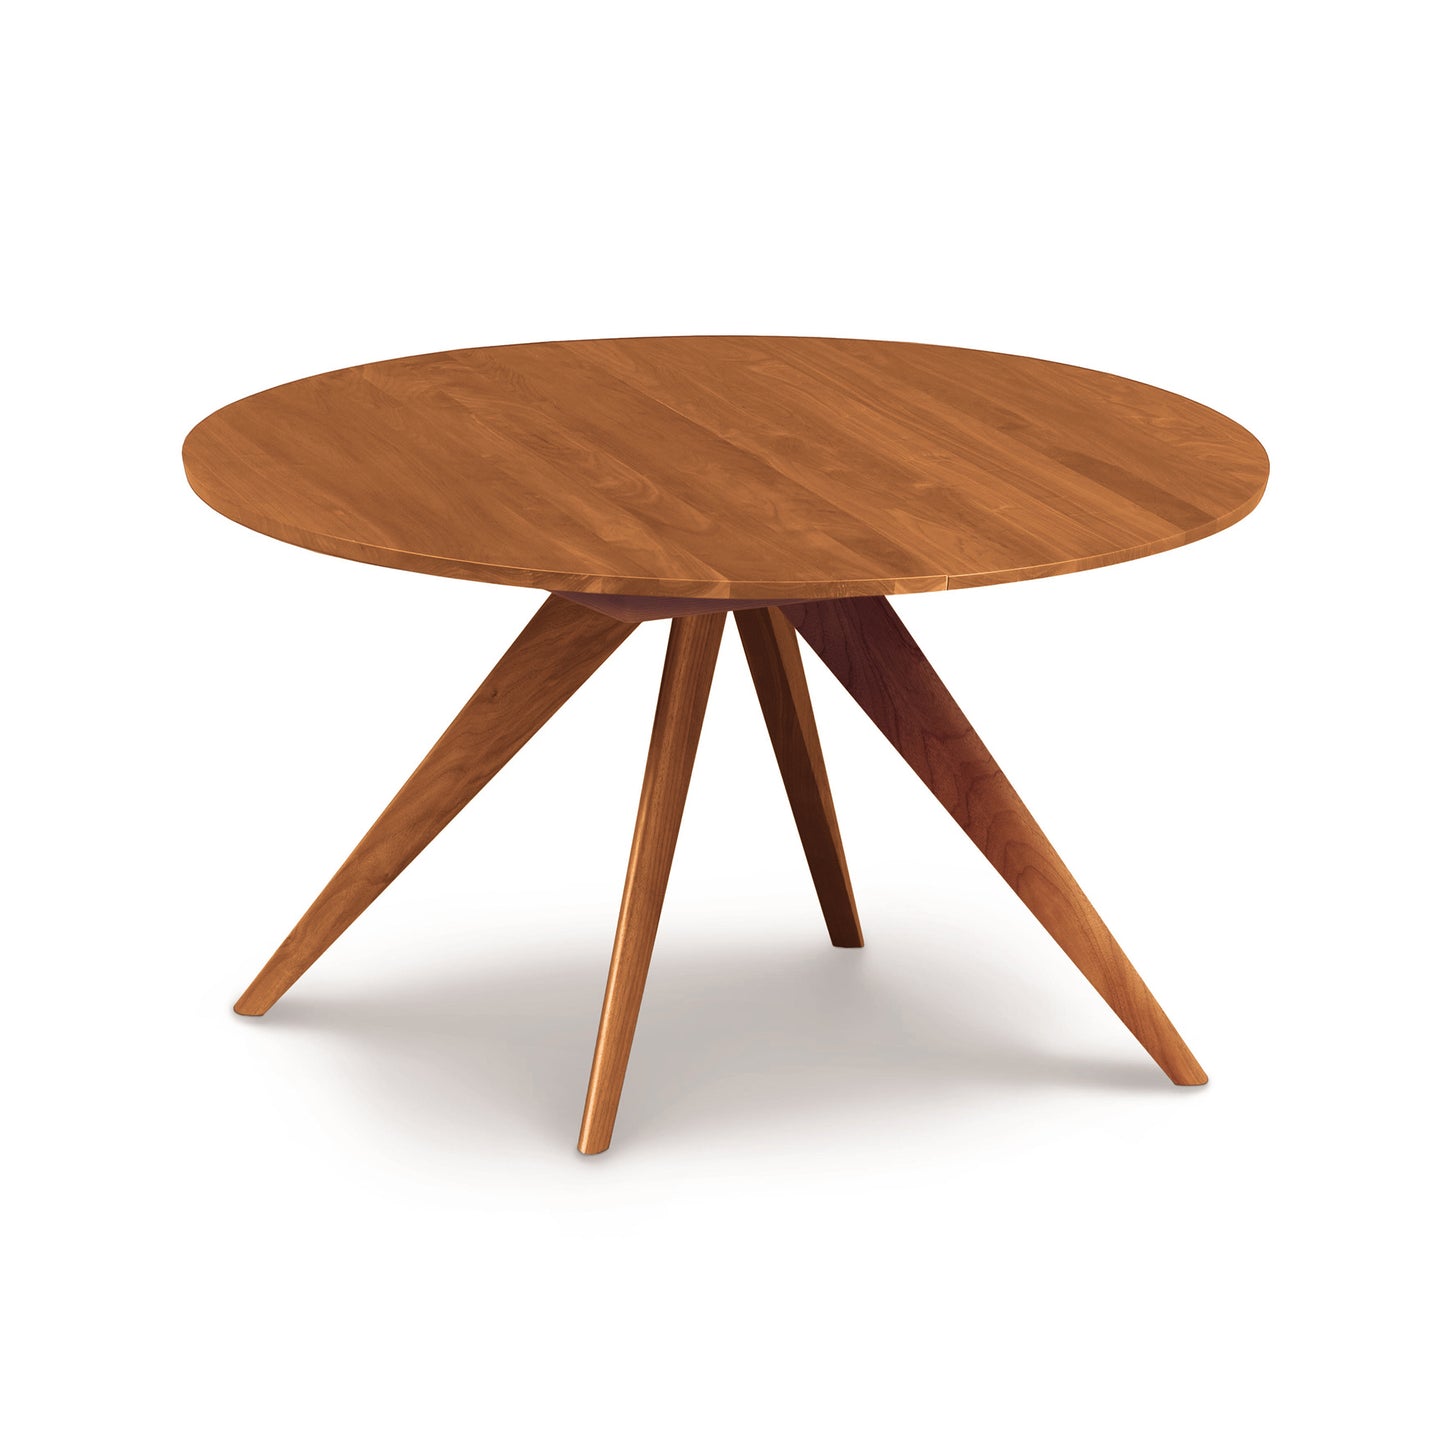 A fine dining Copeland Furniture Catalina Round Extension Table with four angled legs, crafted from solid North American wood and isolated on a white background.